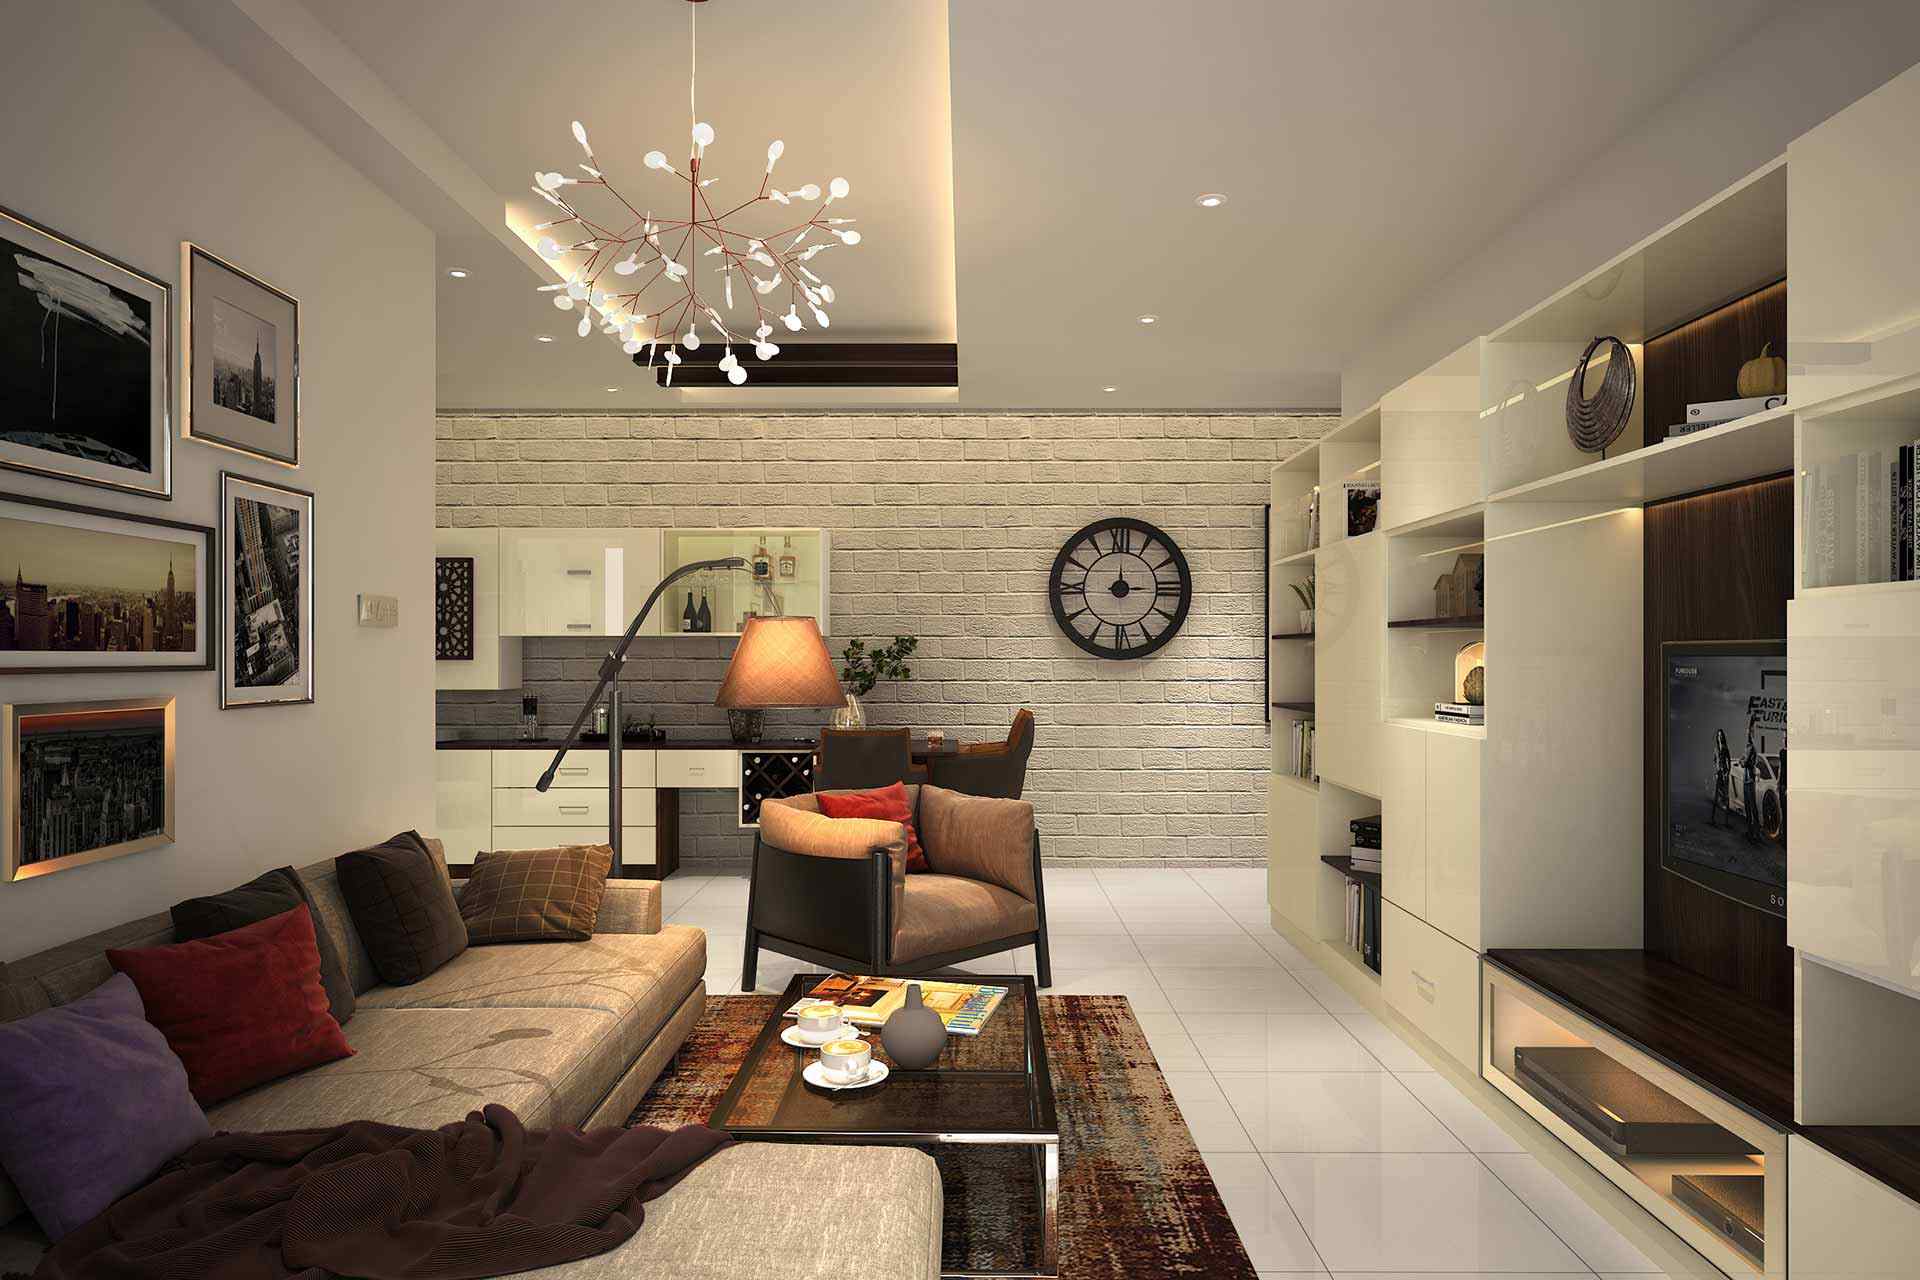 Living Room Ceiling Light Ideas – 15 Ways To Create A Style Statement